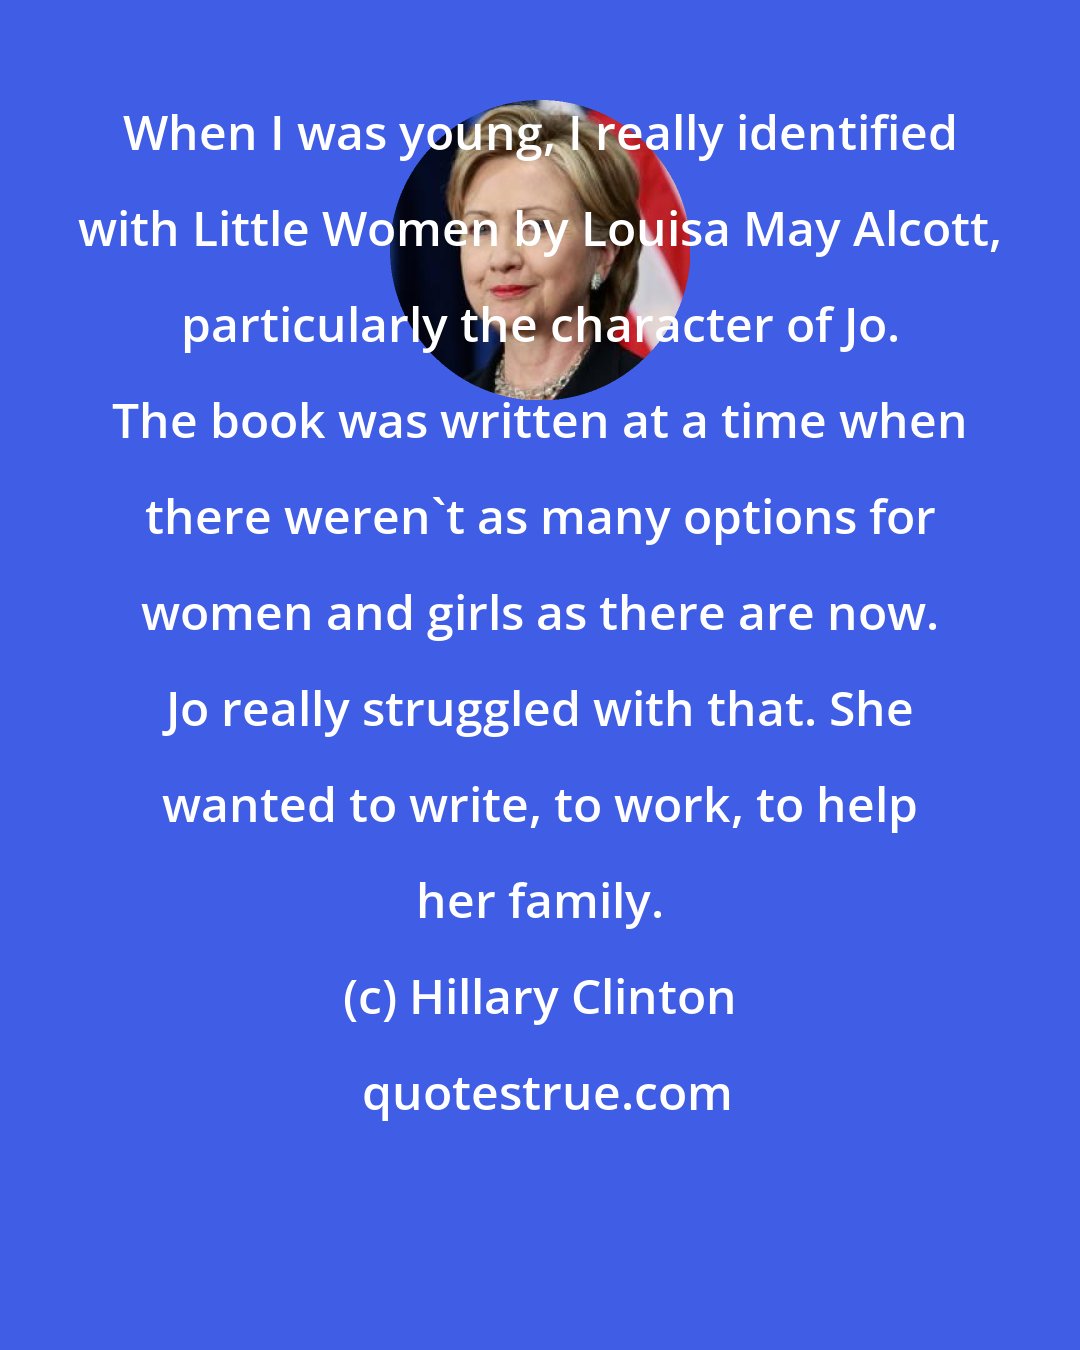 Hillary Clinton: When I was young, I really identified with Little Women by Louisa May Alcott, particularly the character of Jo. The book was written at a time when there weren't as many options for women and girls as there are now. Jo really struggled with that. She wanted to write, to work, to help her family.